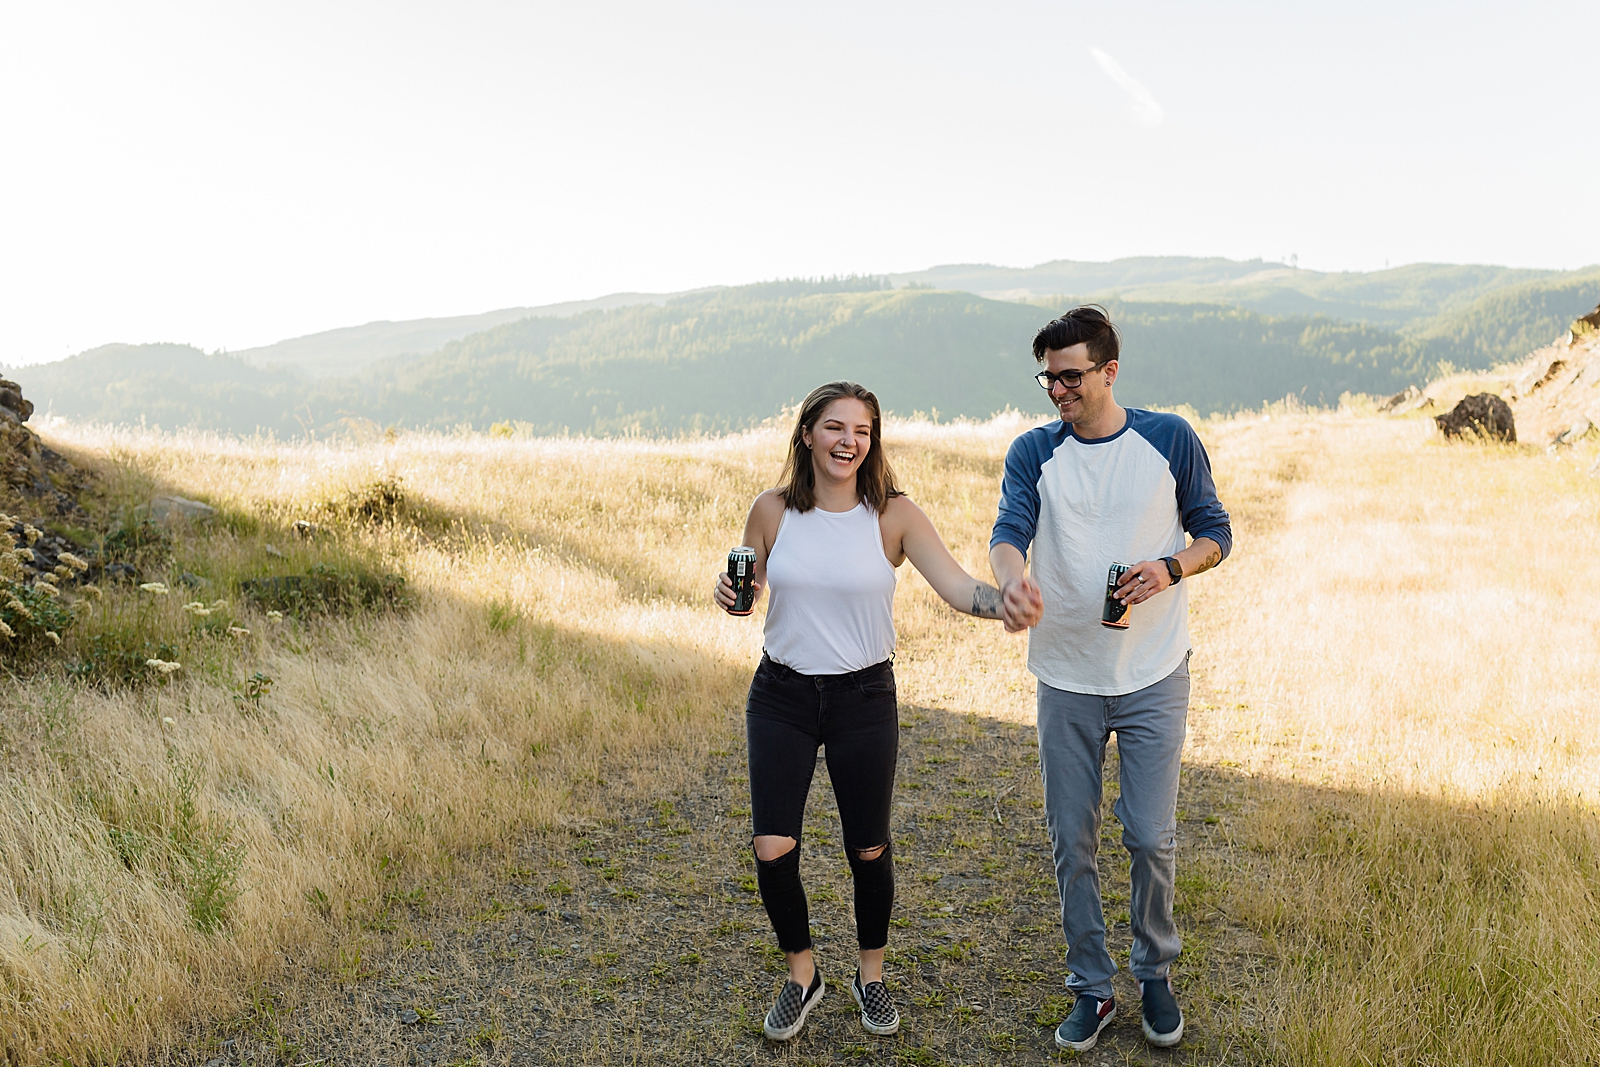 Couple walking on field holding hands with mountain behind them